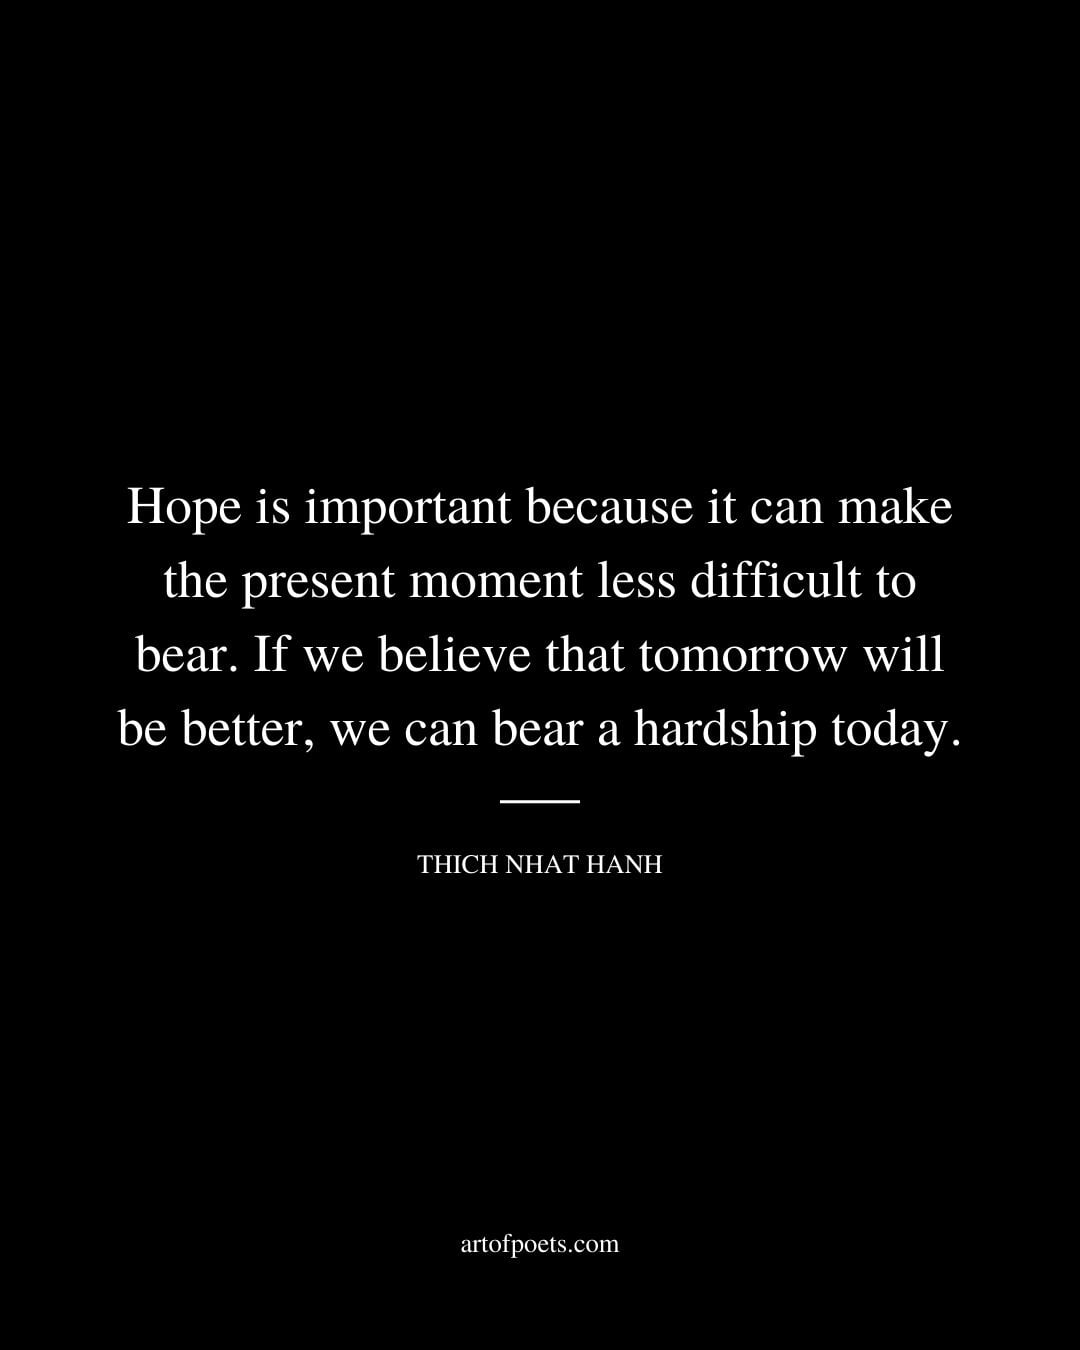 Hope is important because it can make the present moment less difficult to bear